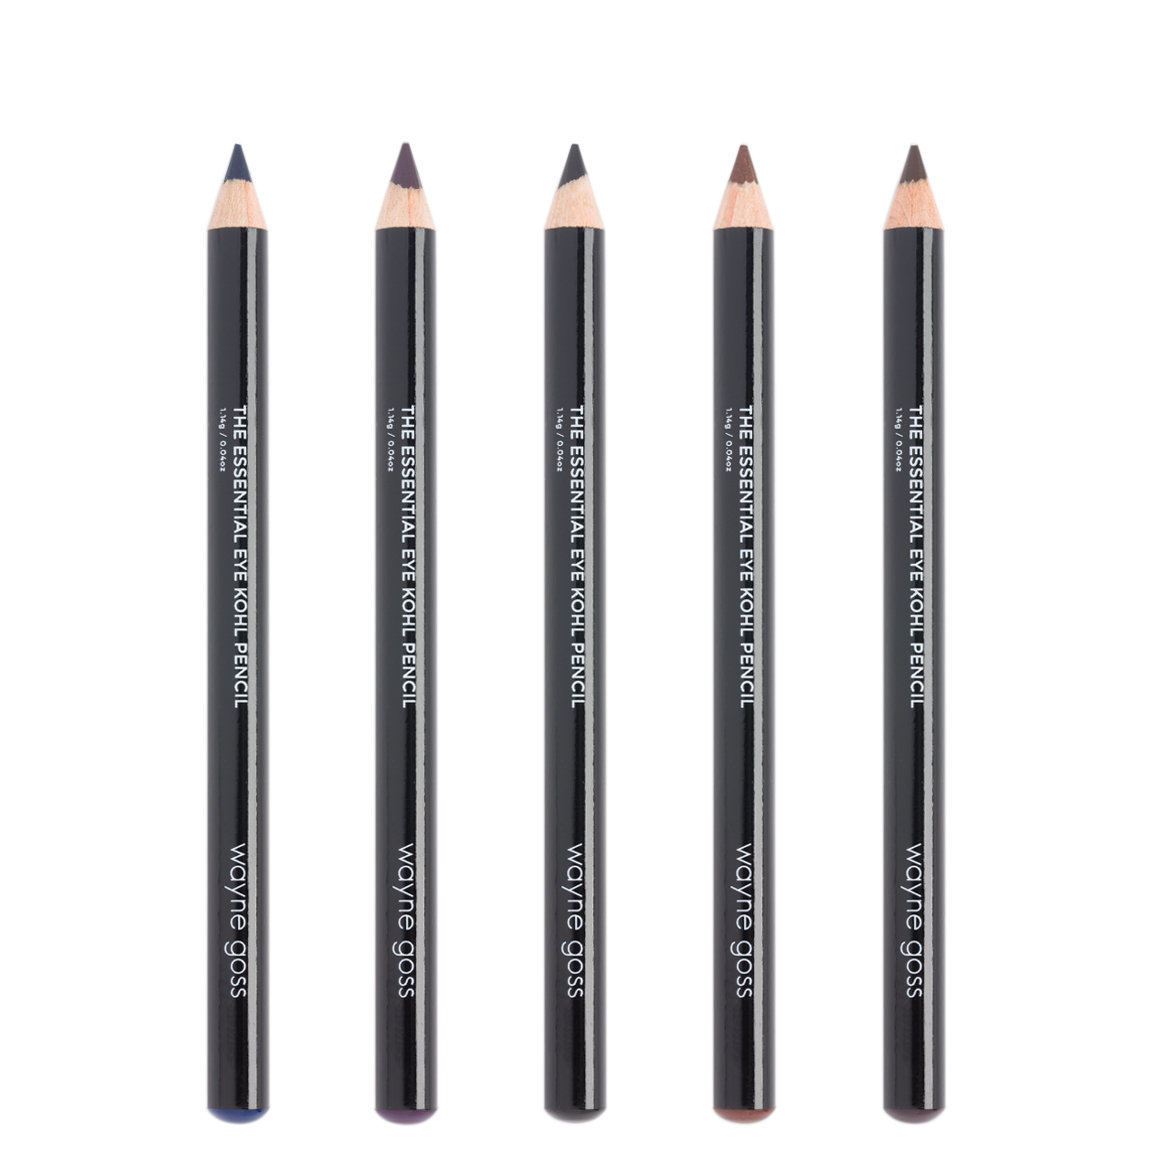 Wayne Goss The Essential Eye Kohl Pencil Collection alternative view 1 - product swatch.